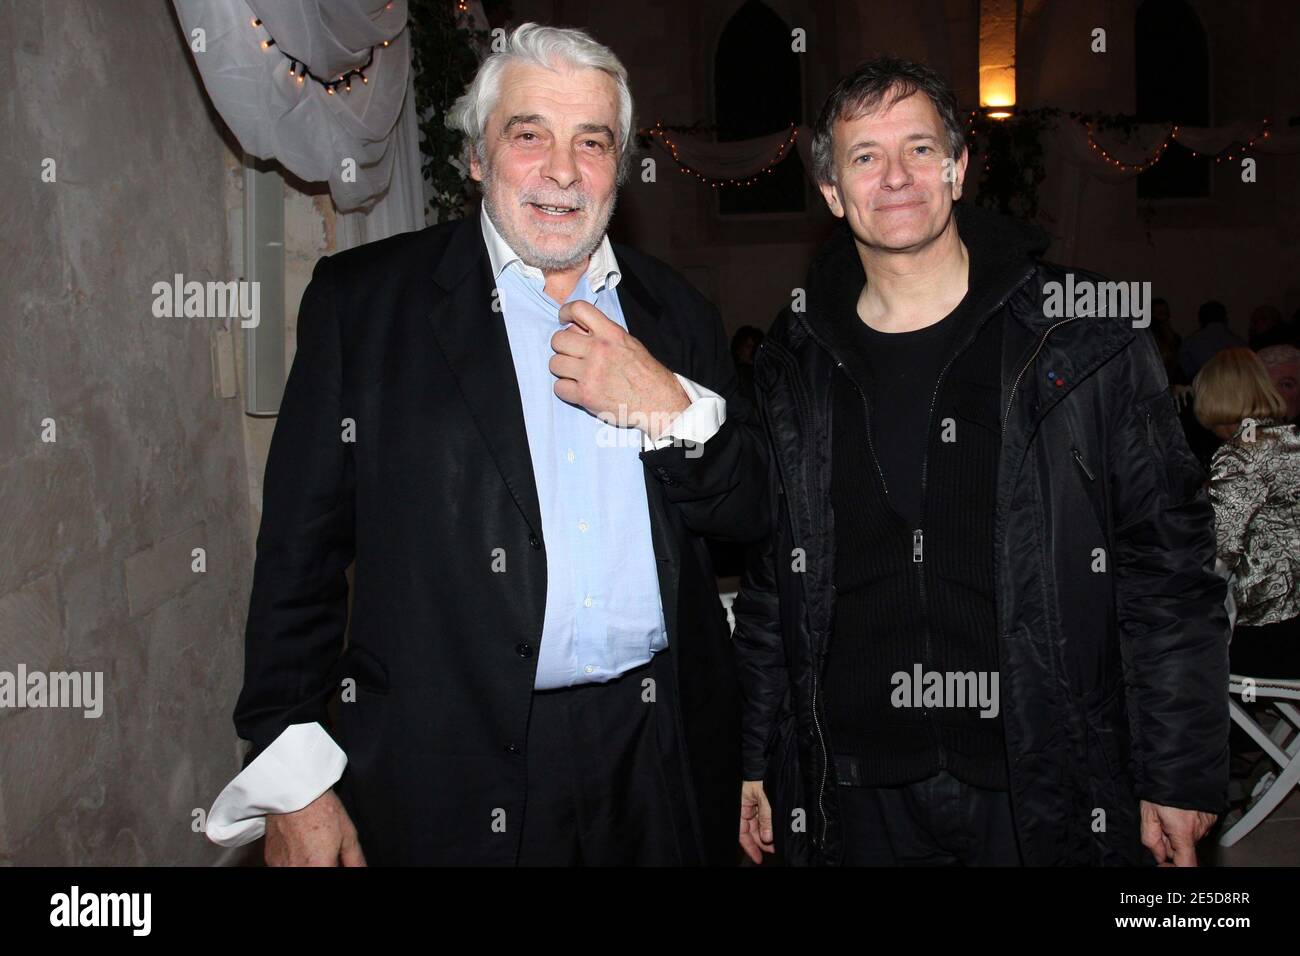 Jury president Jacques Weber with Francis Huster during the premiere of 'Un  homme et son chien' directed by Francis Huster (Jean Paul Belmondo's last  movie) and opening ceremony of the 9th Film